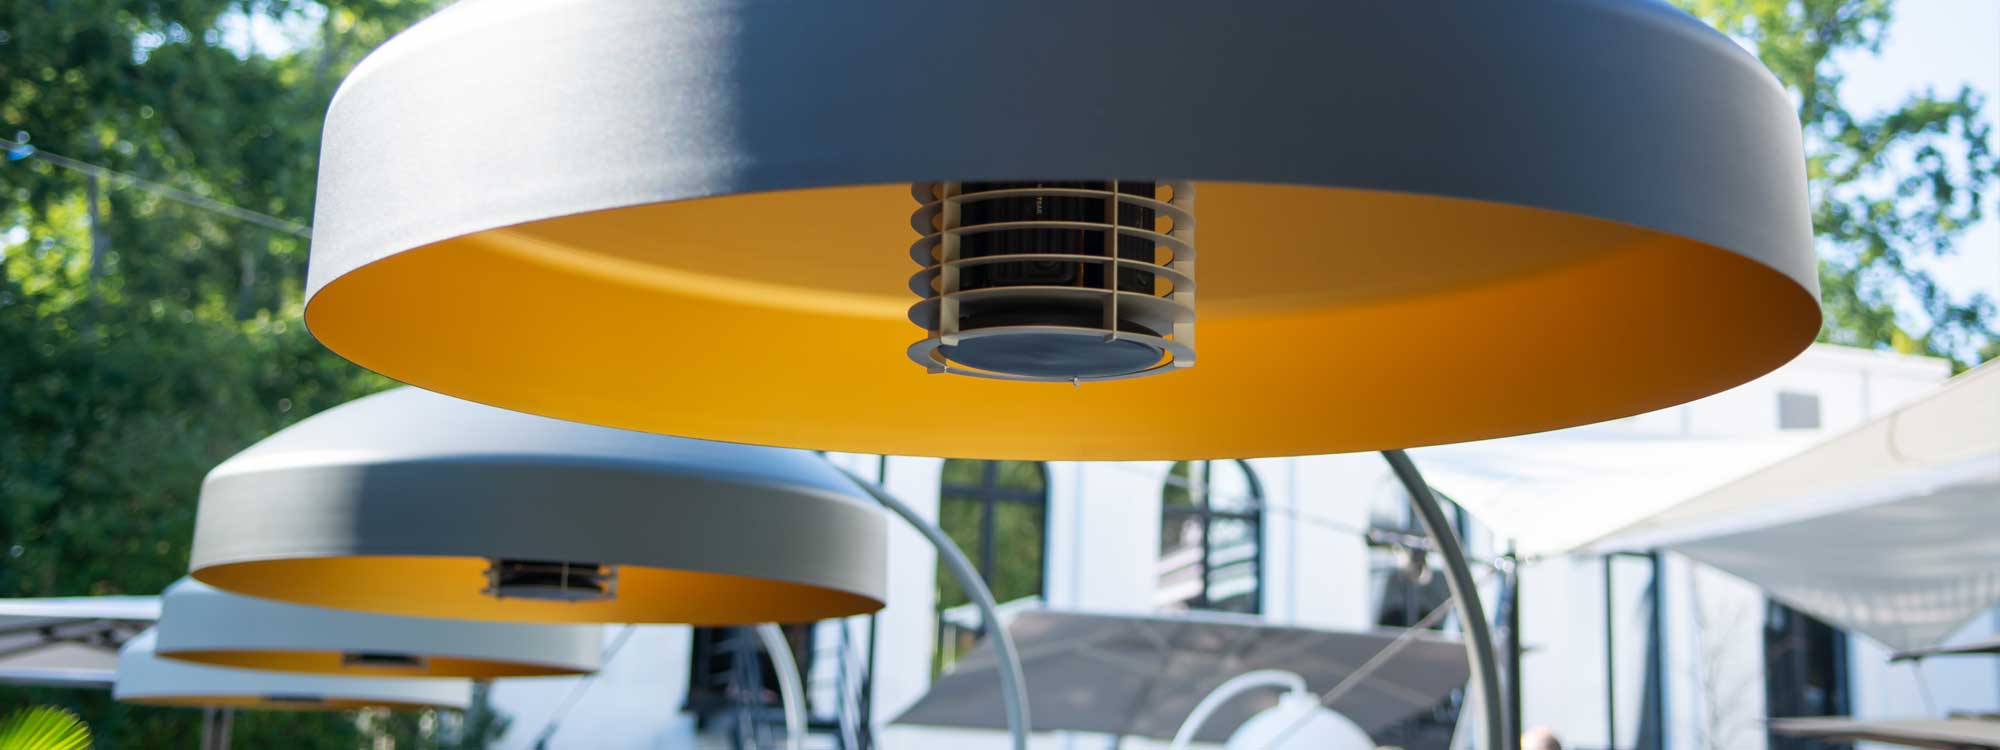 Disc modern patio heater is a low energy terrace heater with dimmable outdoor light by Piet Boon for Heatsail zero emission garden heater Co.